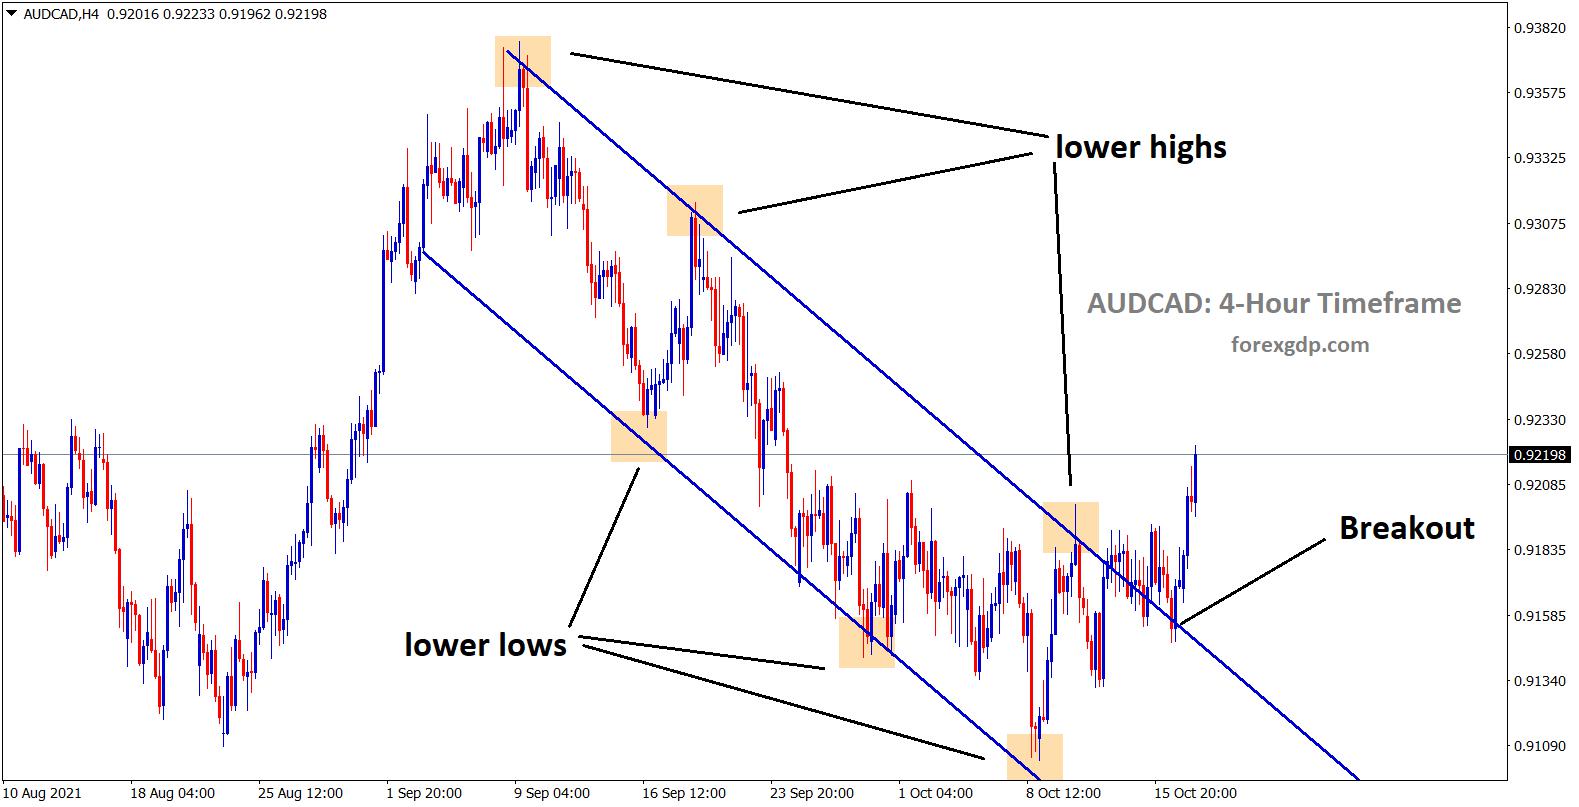 AUDCAD: Rebounding from the Multi-year support